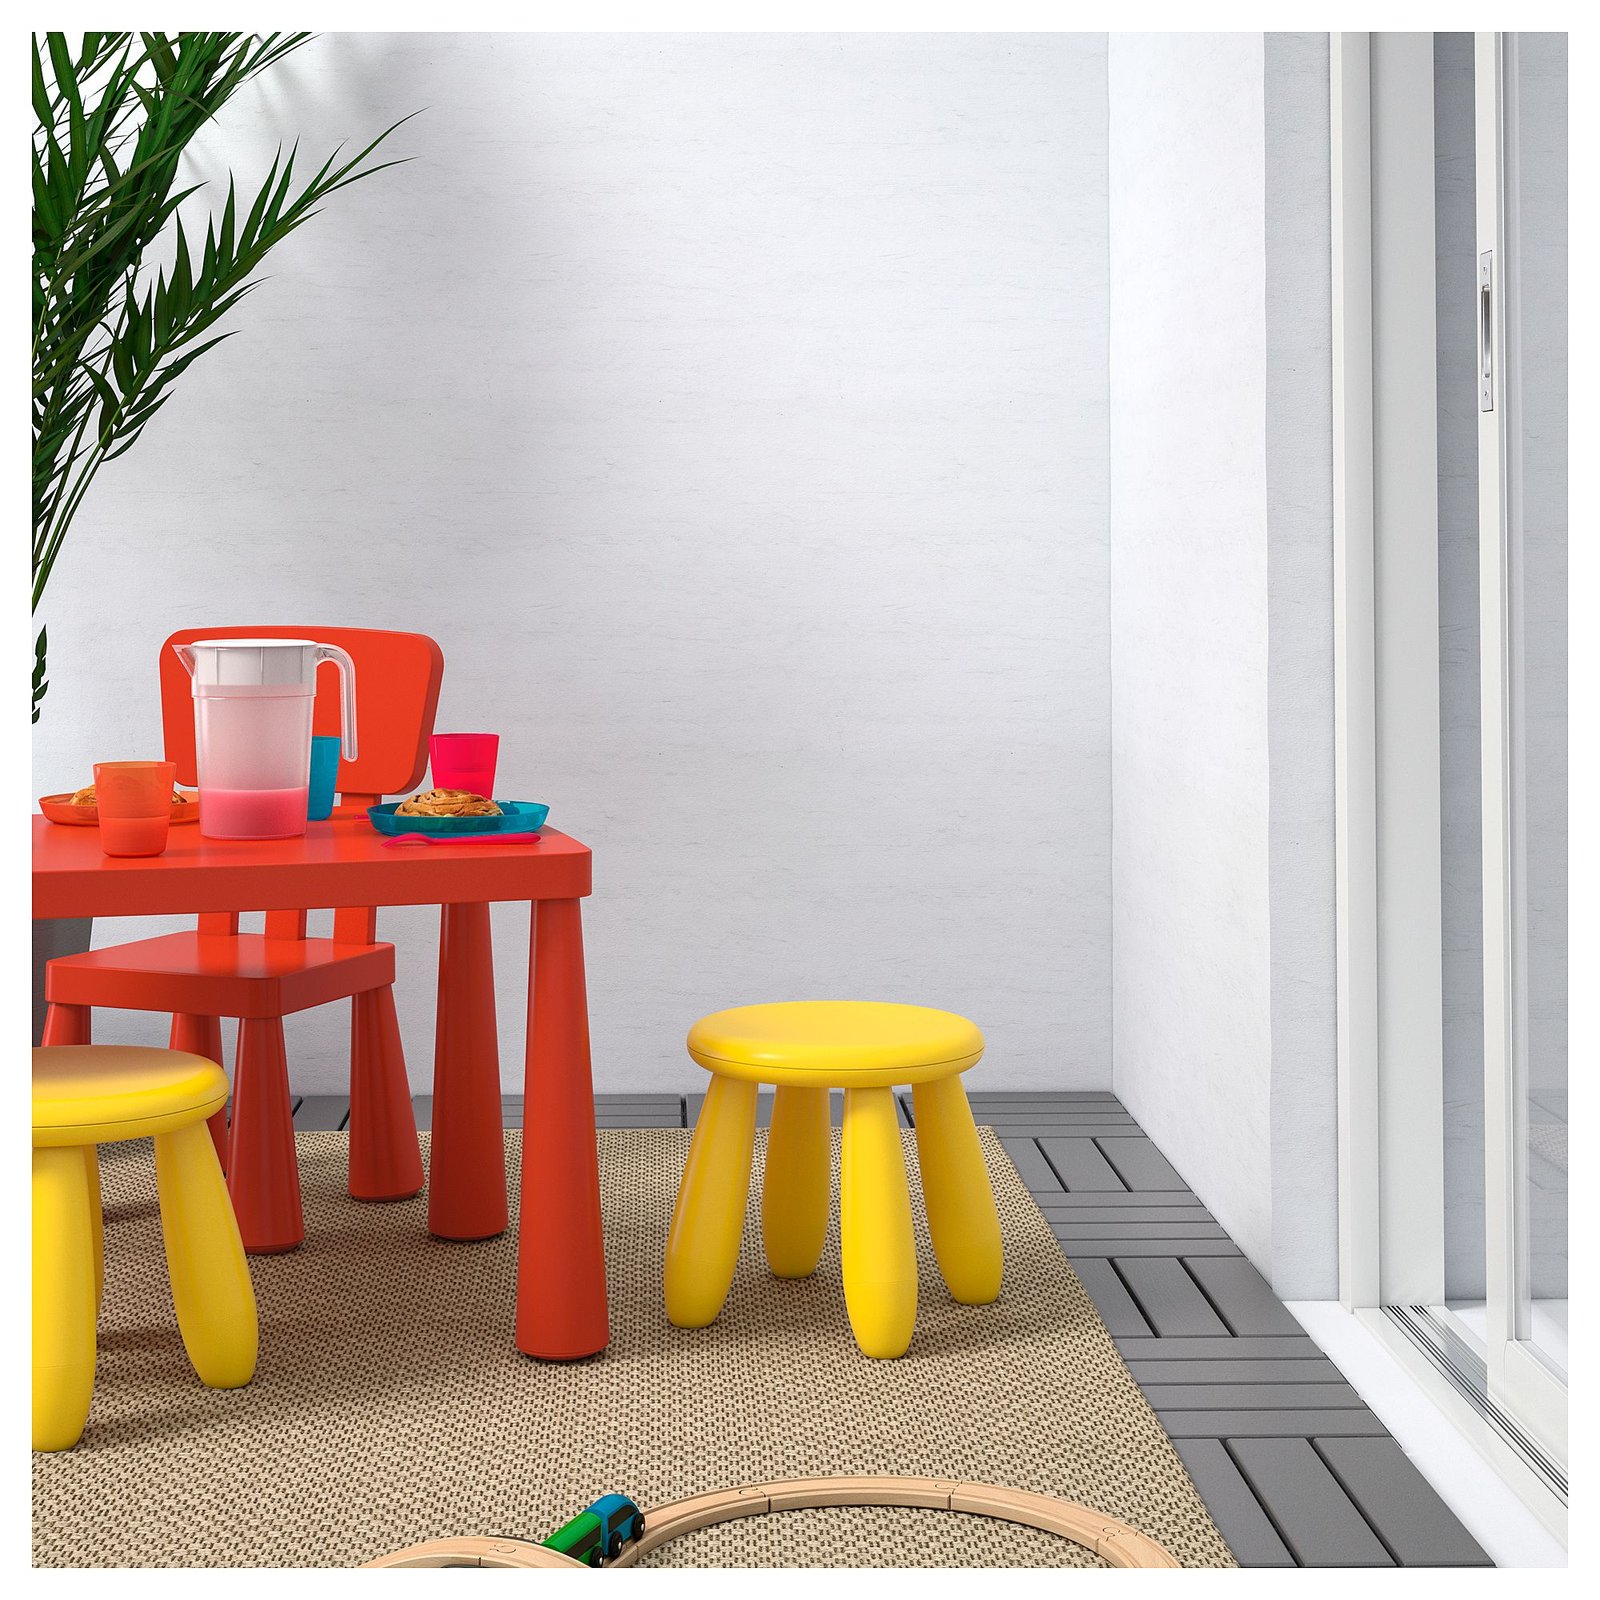 IKEA Mammut childrens stools are particularly popular with the little